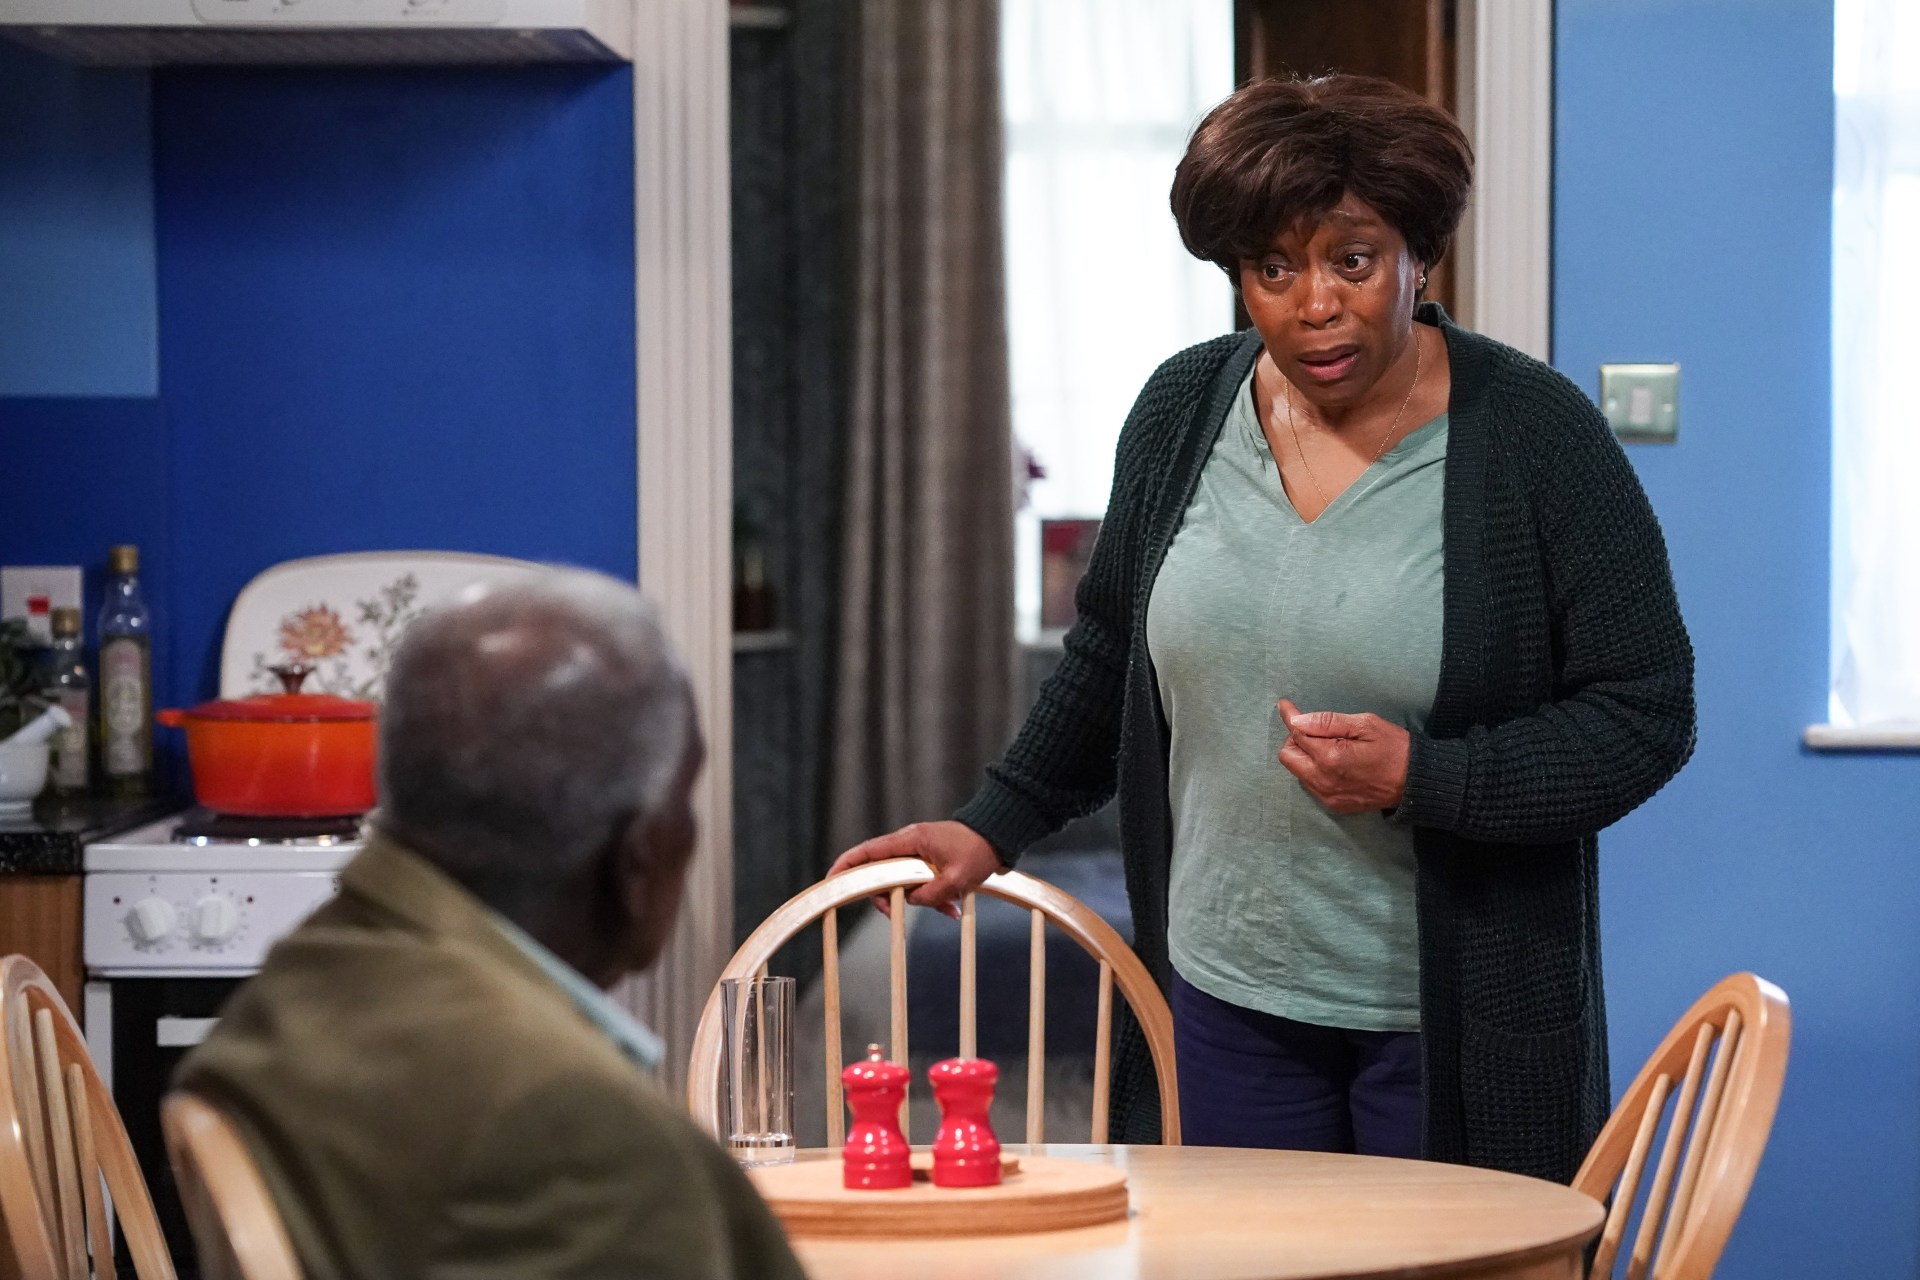 eastenders and emmerdale's special episodes may be the year's best